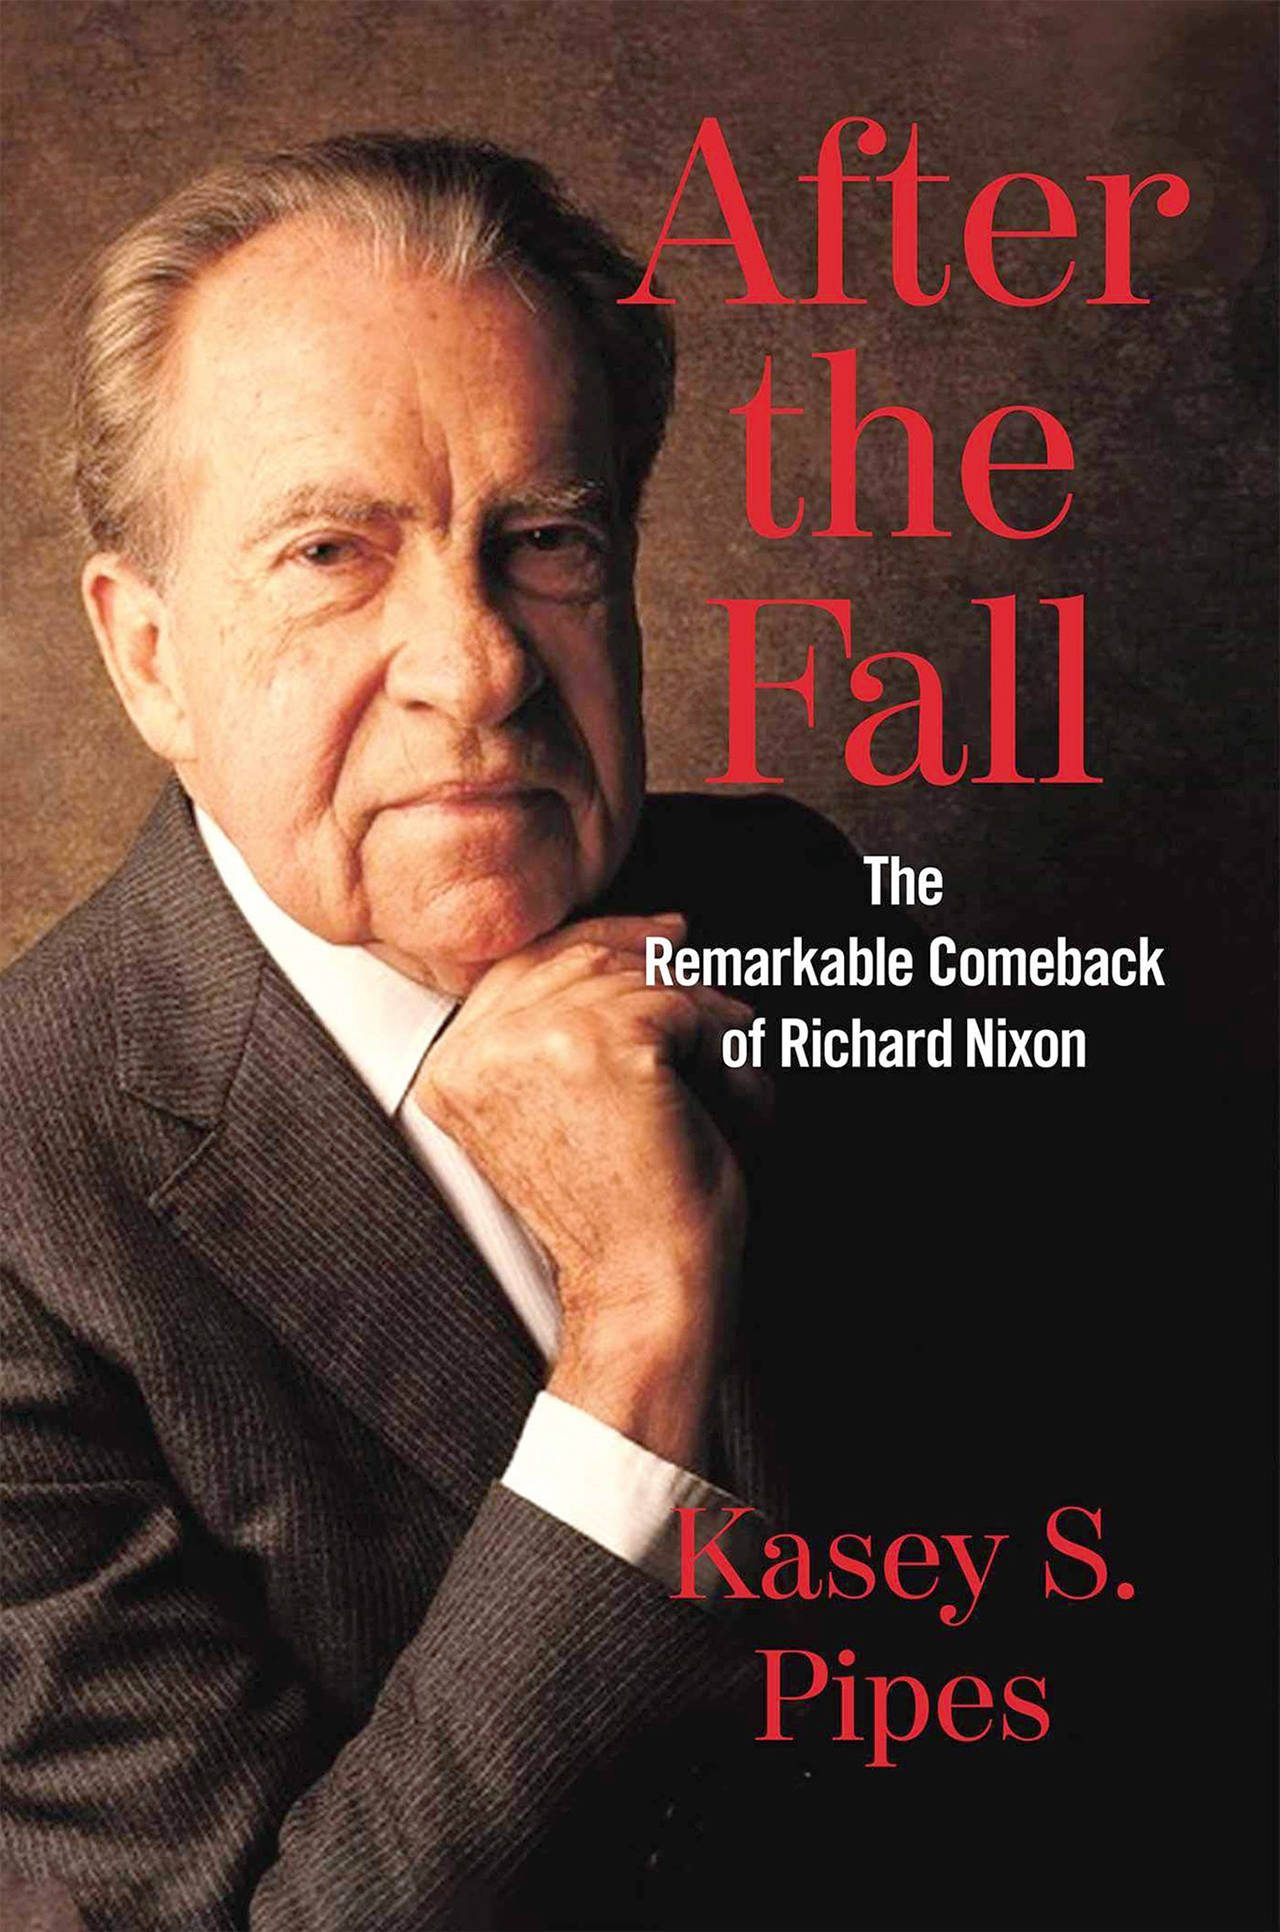 “After the Fall: The Remarkable Comeback of Richard Nixon,” by Kasey Pipes.